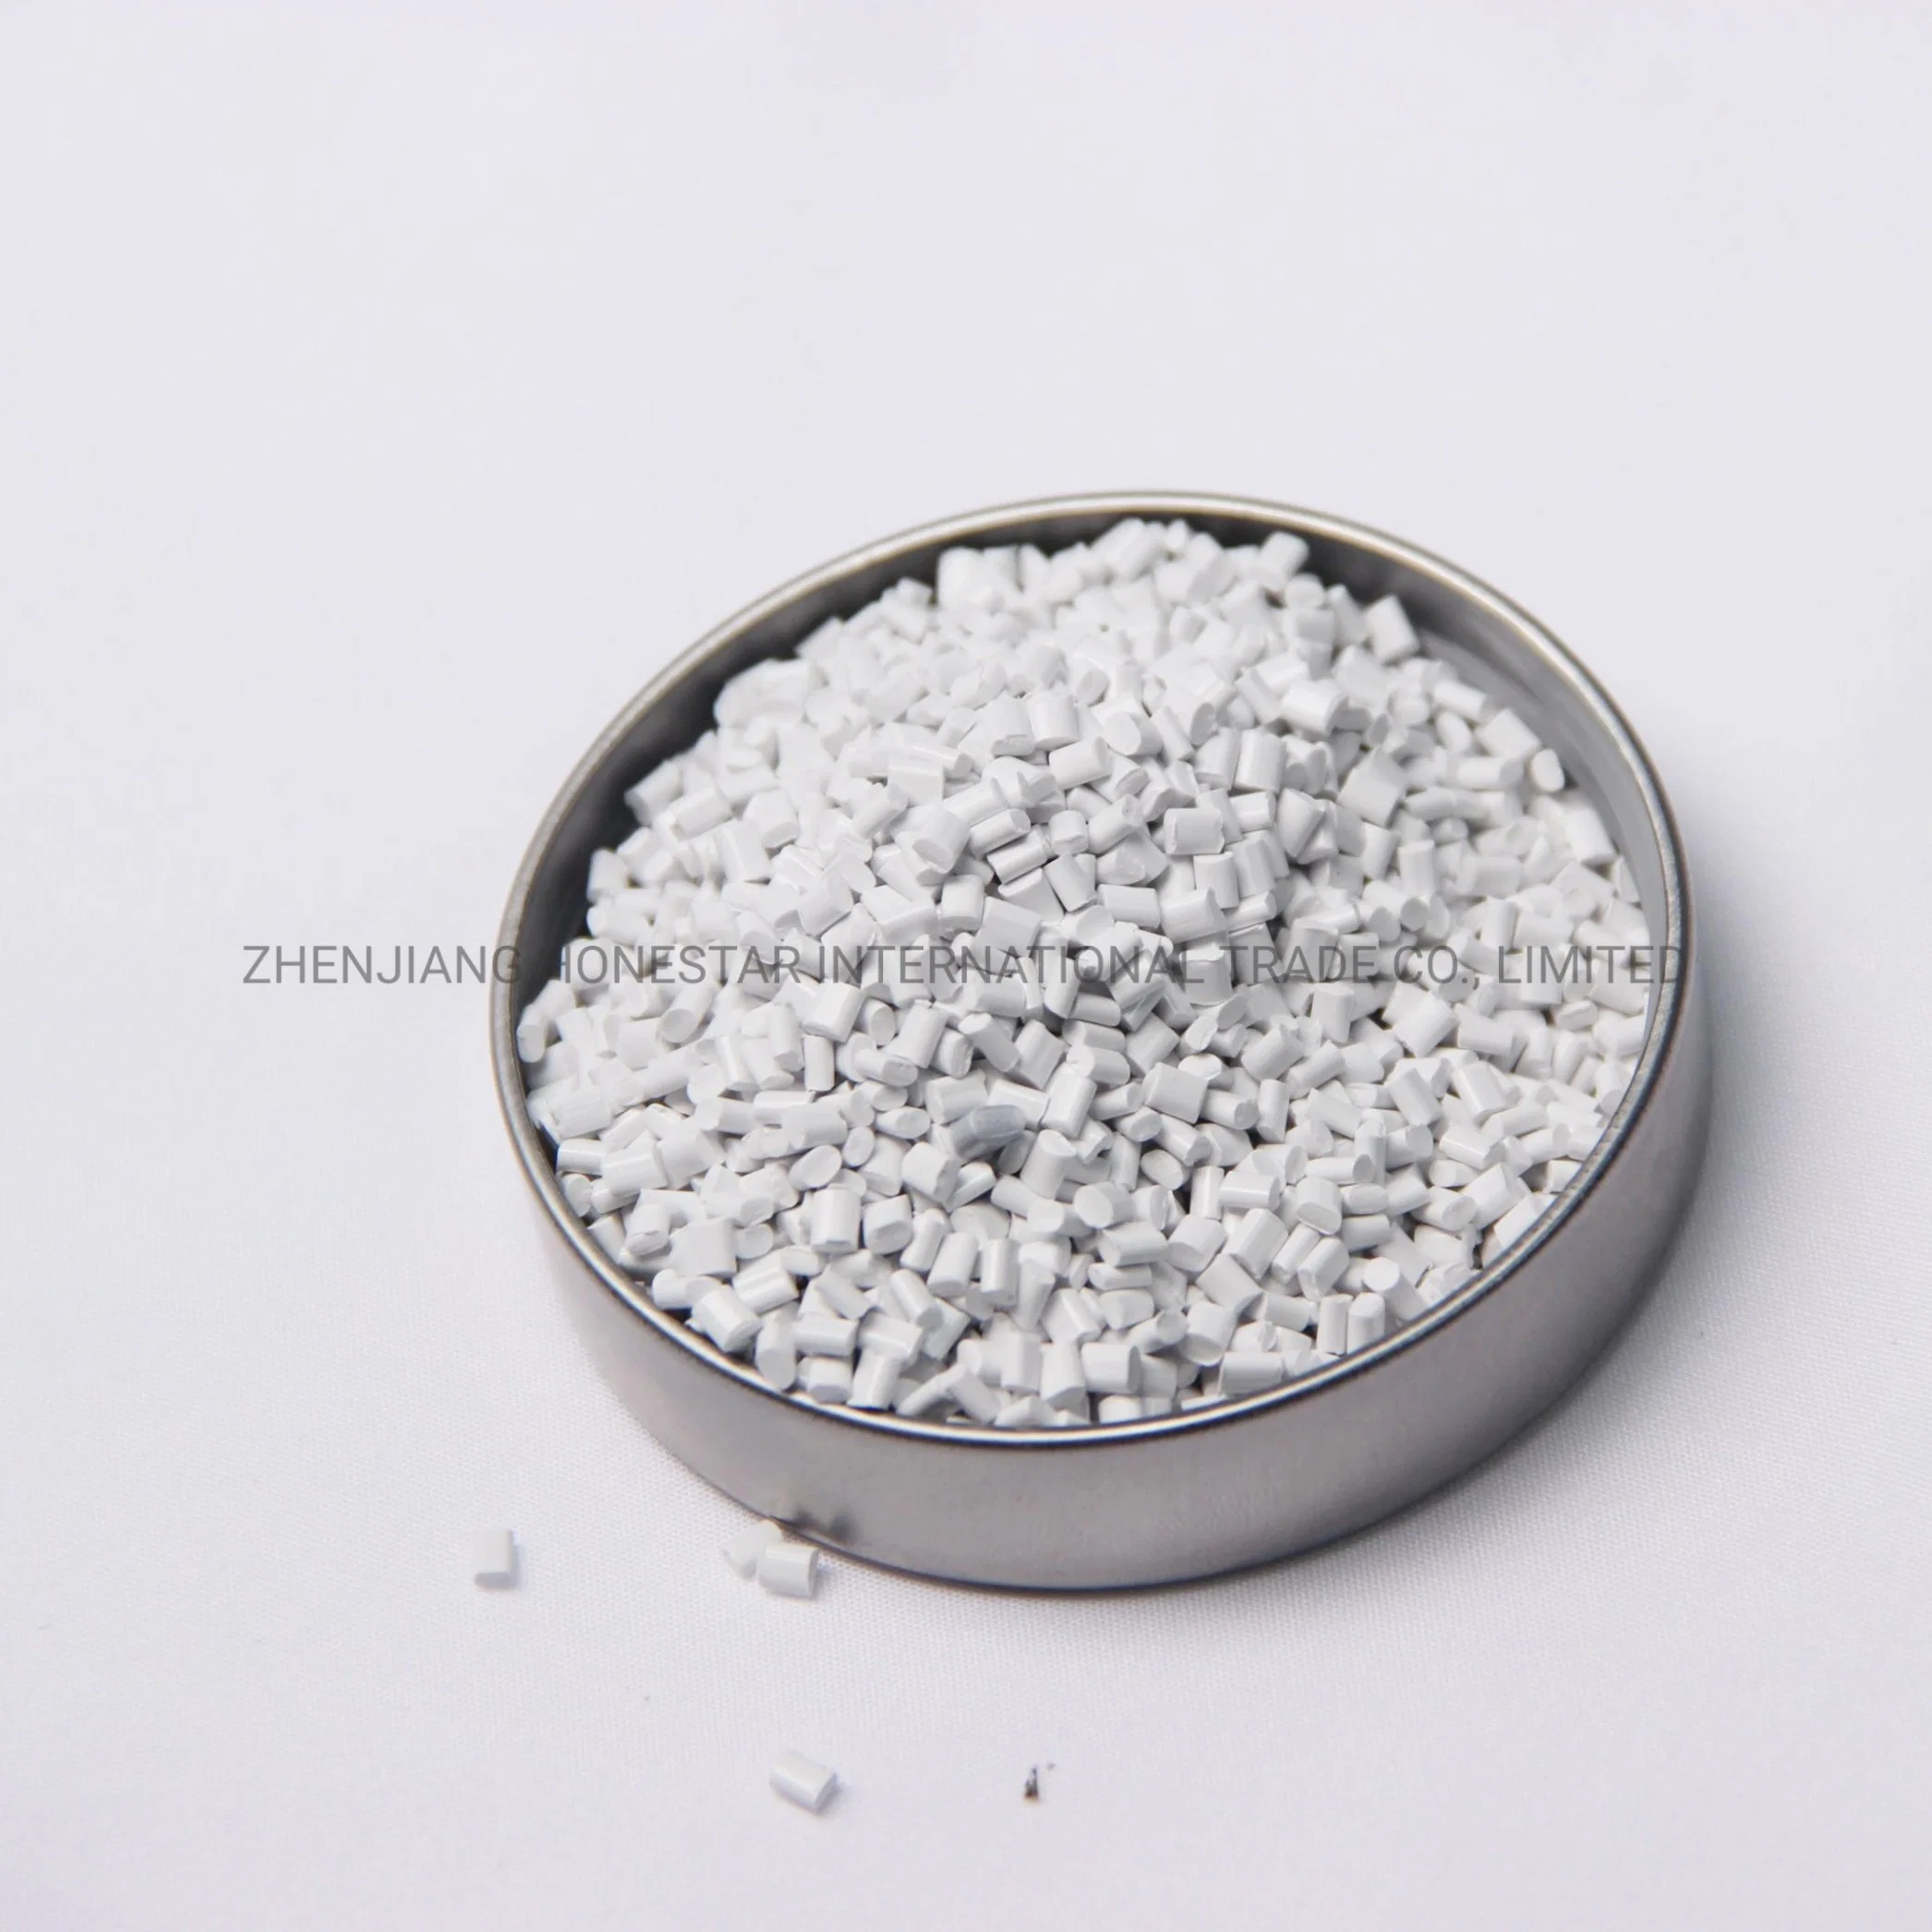 Flame Retardant ABS HP181-C0083s White Color Pellets Polymer High Flow UL94 Hb for Electric Products ABS Virgin ABS Pellets